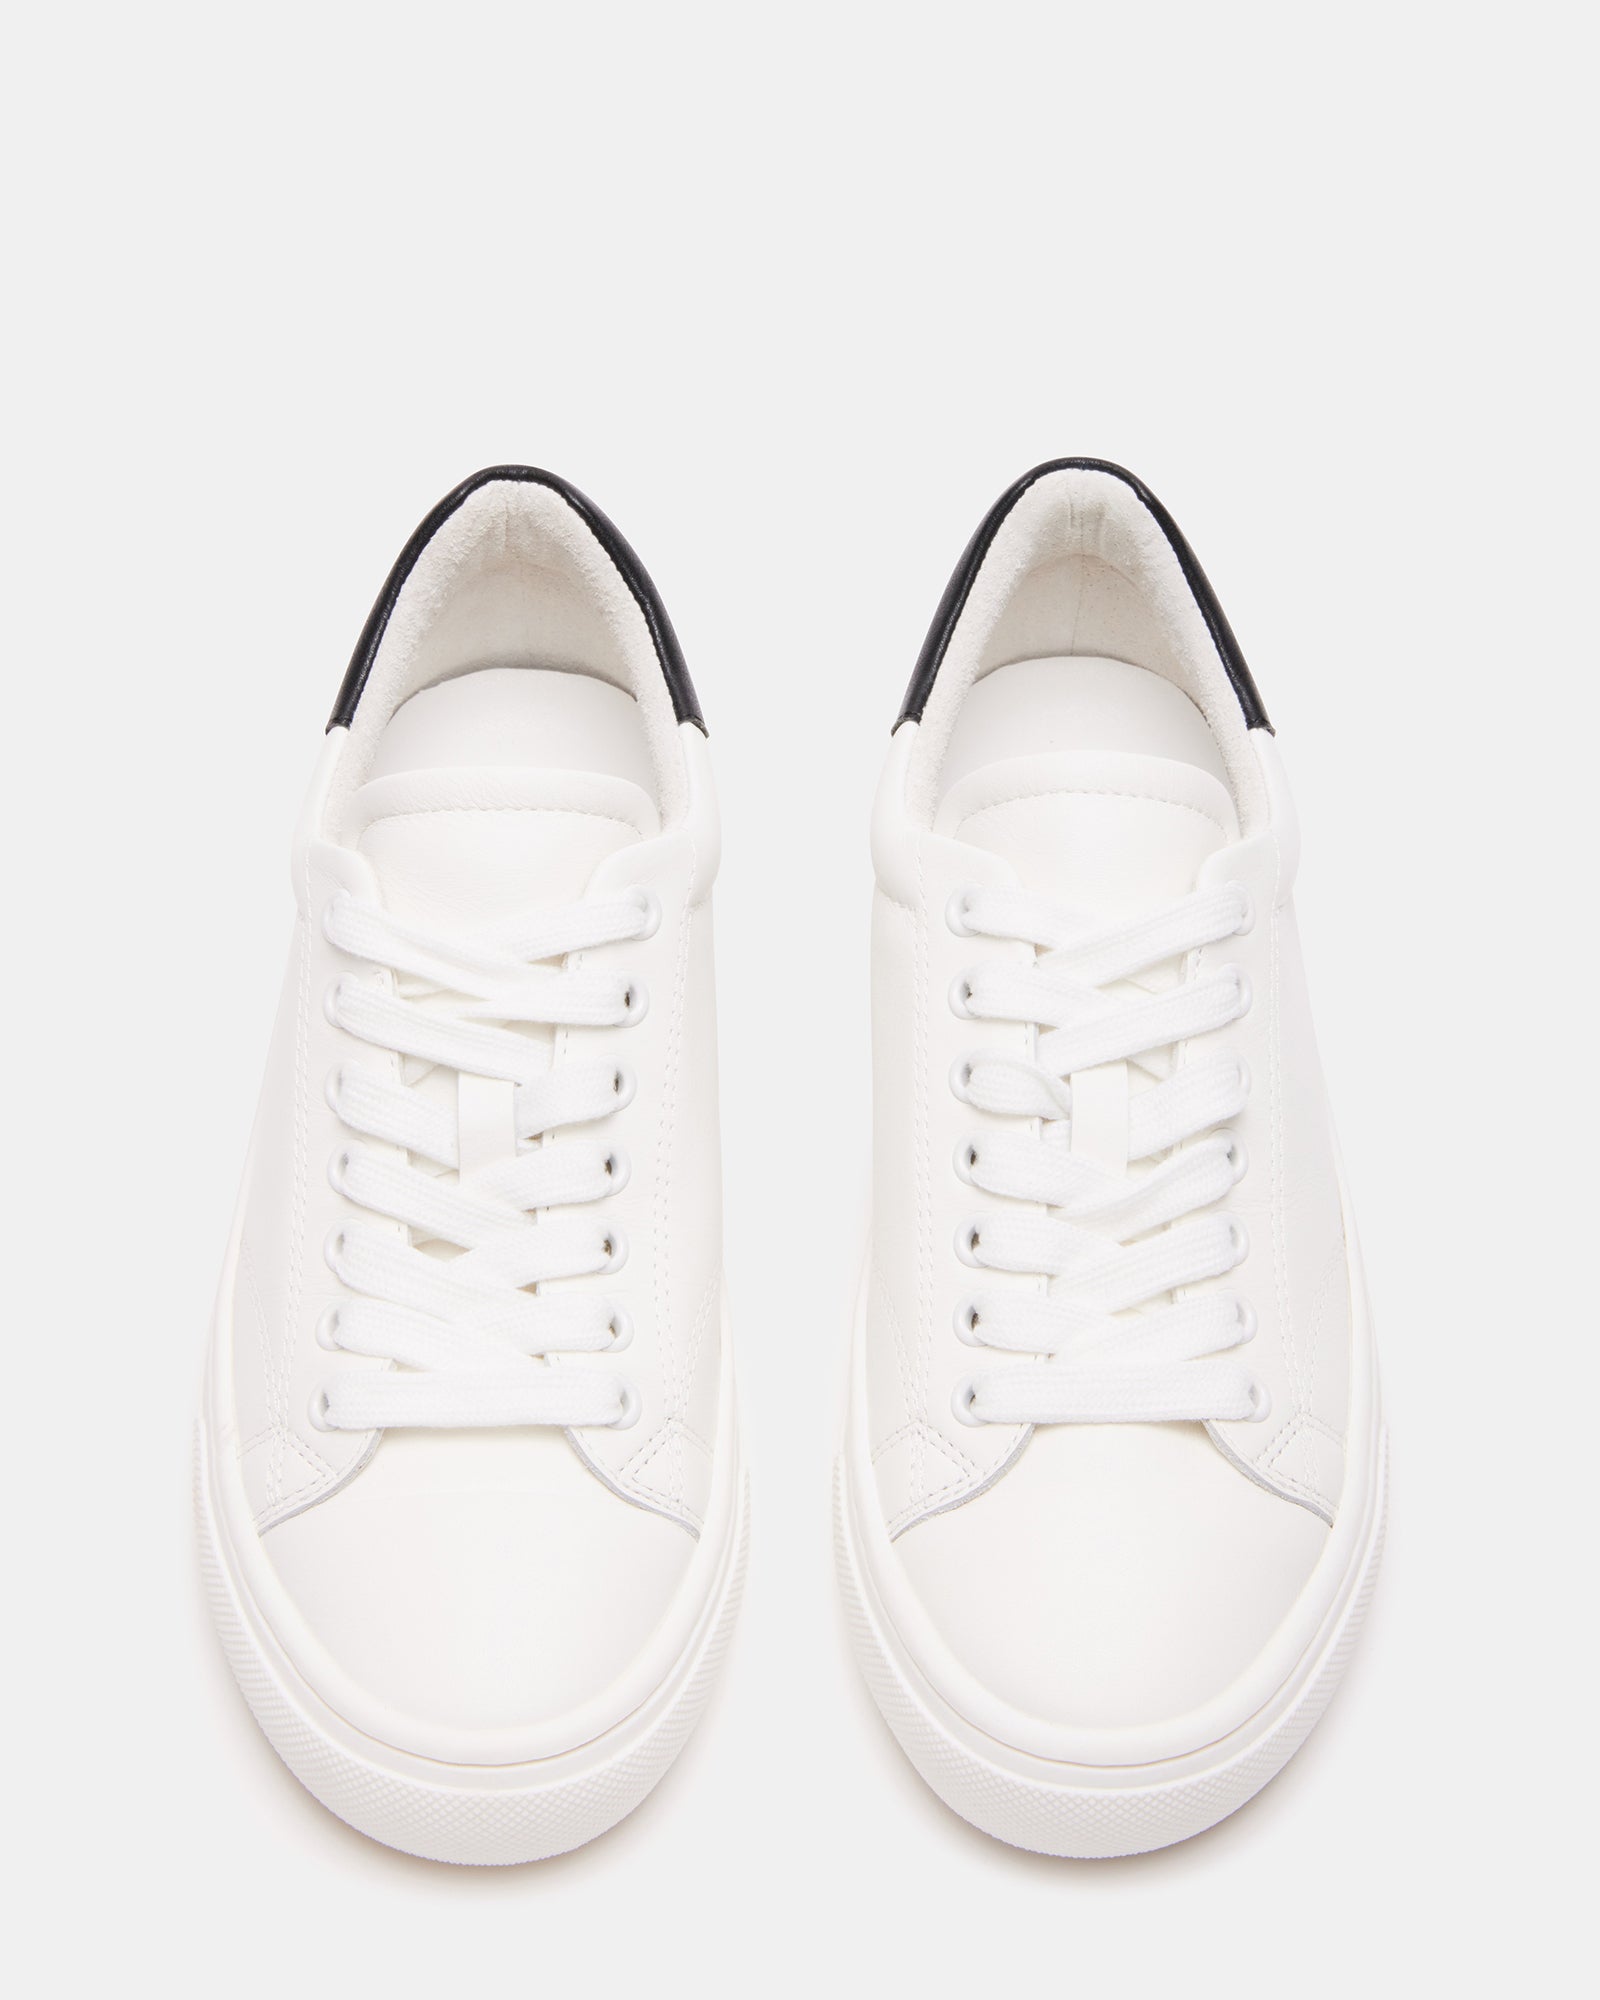 CAPTIVATE White/Black Low-Top Lace-Up Sneaker | Women's Sneakers ...